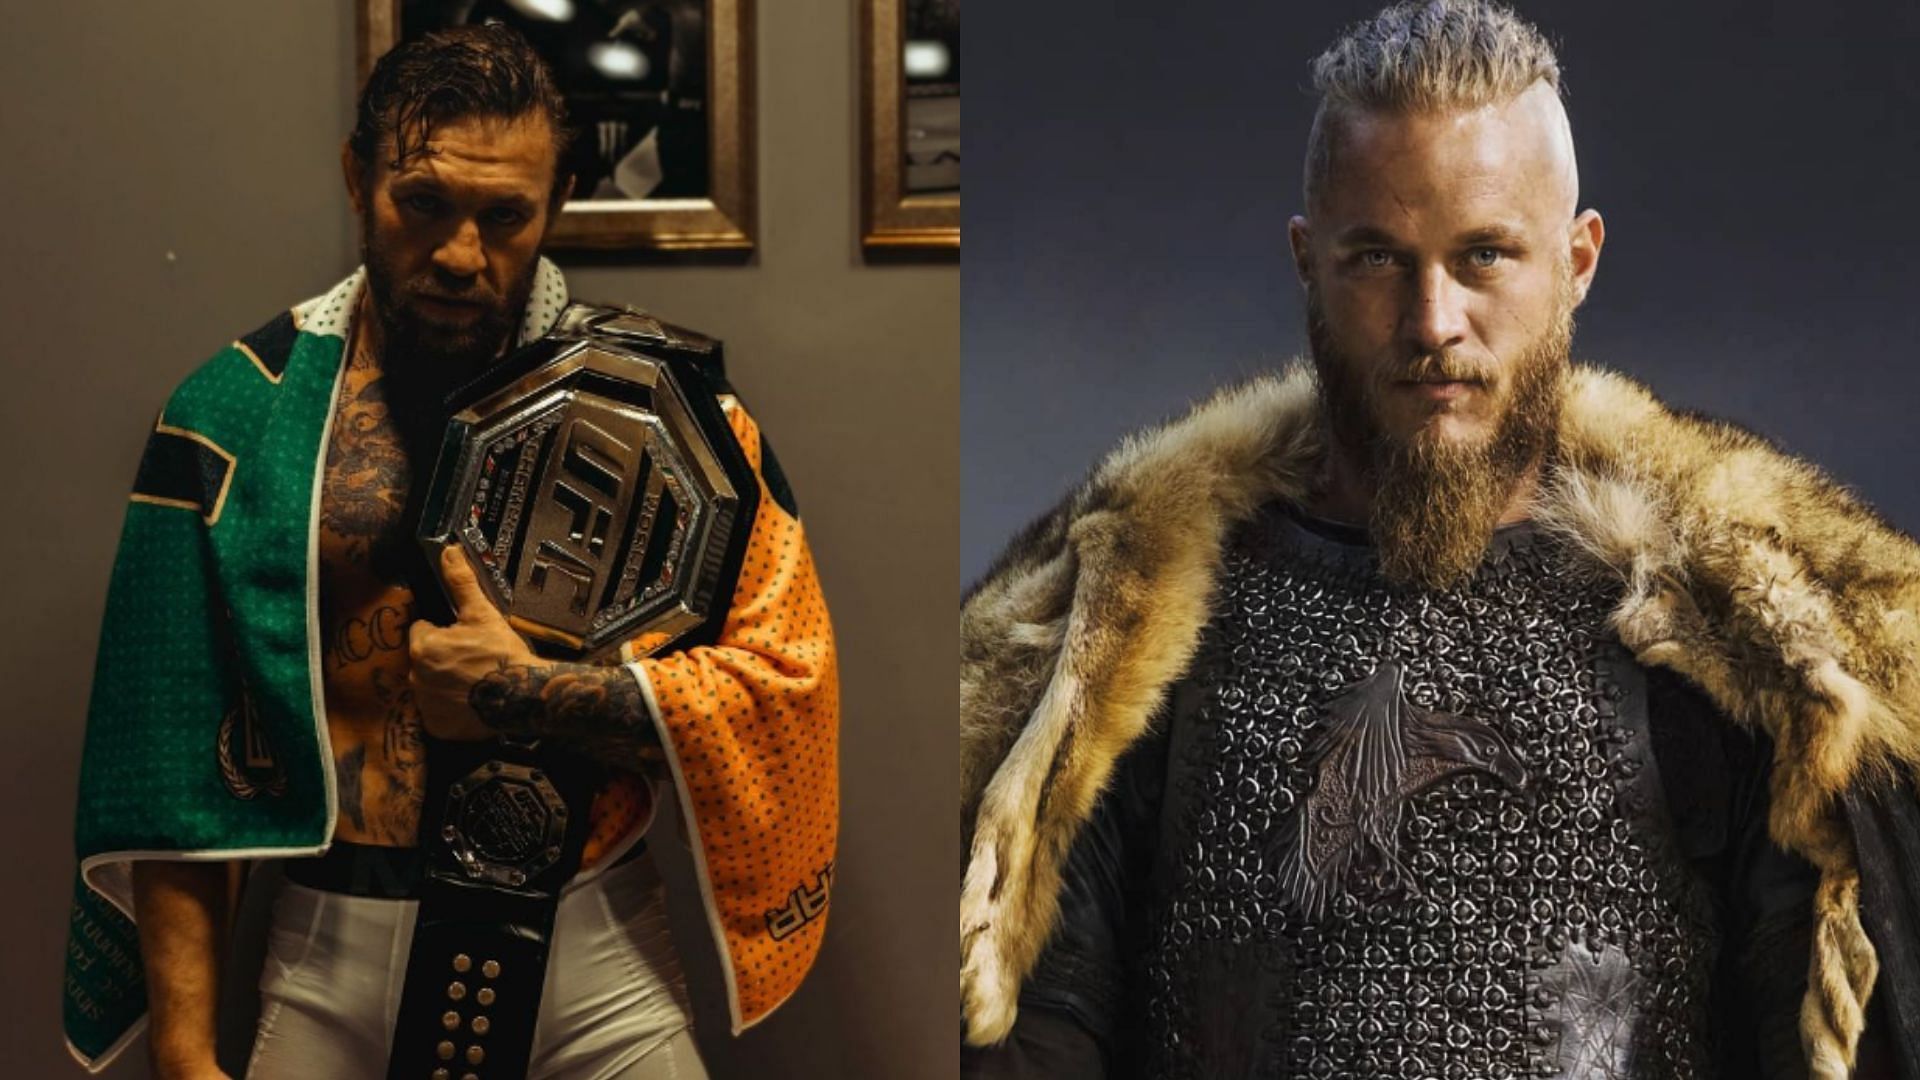 Conor McGregor once revealed he was originally set to make his acting debut on Vikings [Images courtesy of @thenotoriousmma &amp; @historyvikings on Instatram]